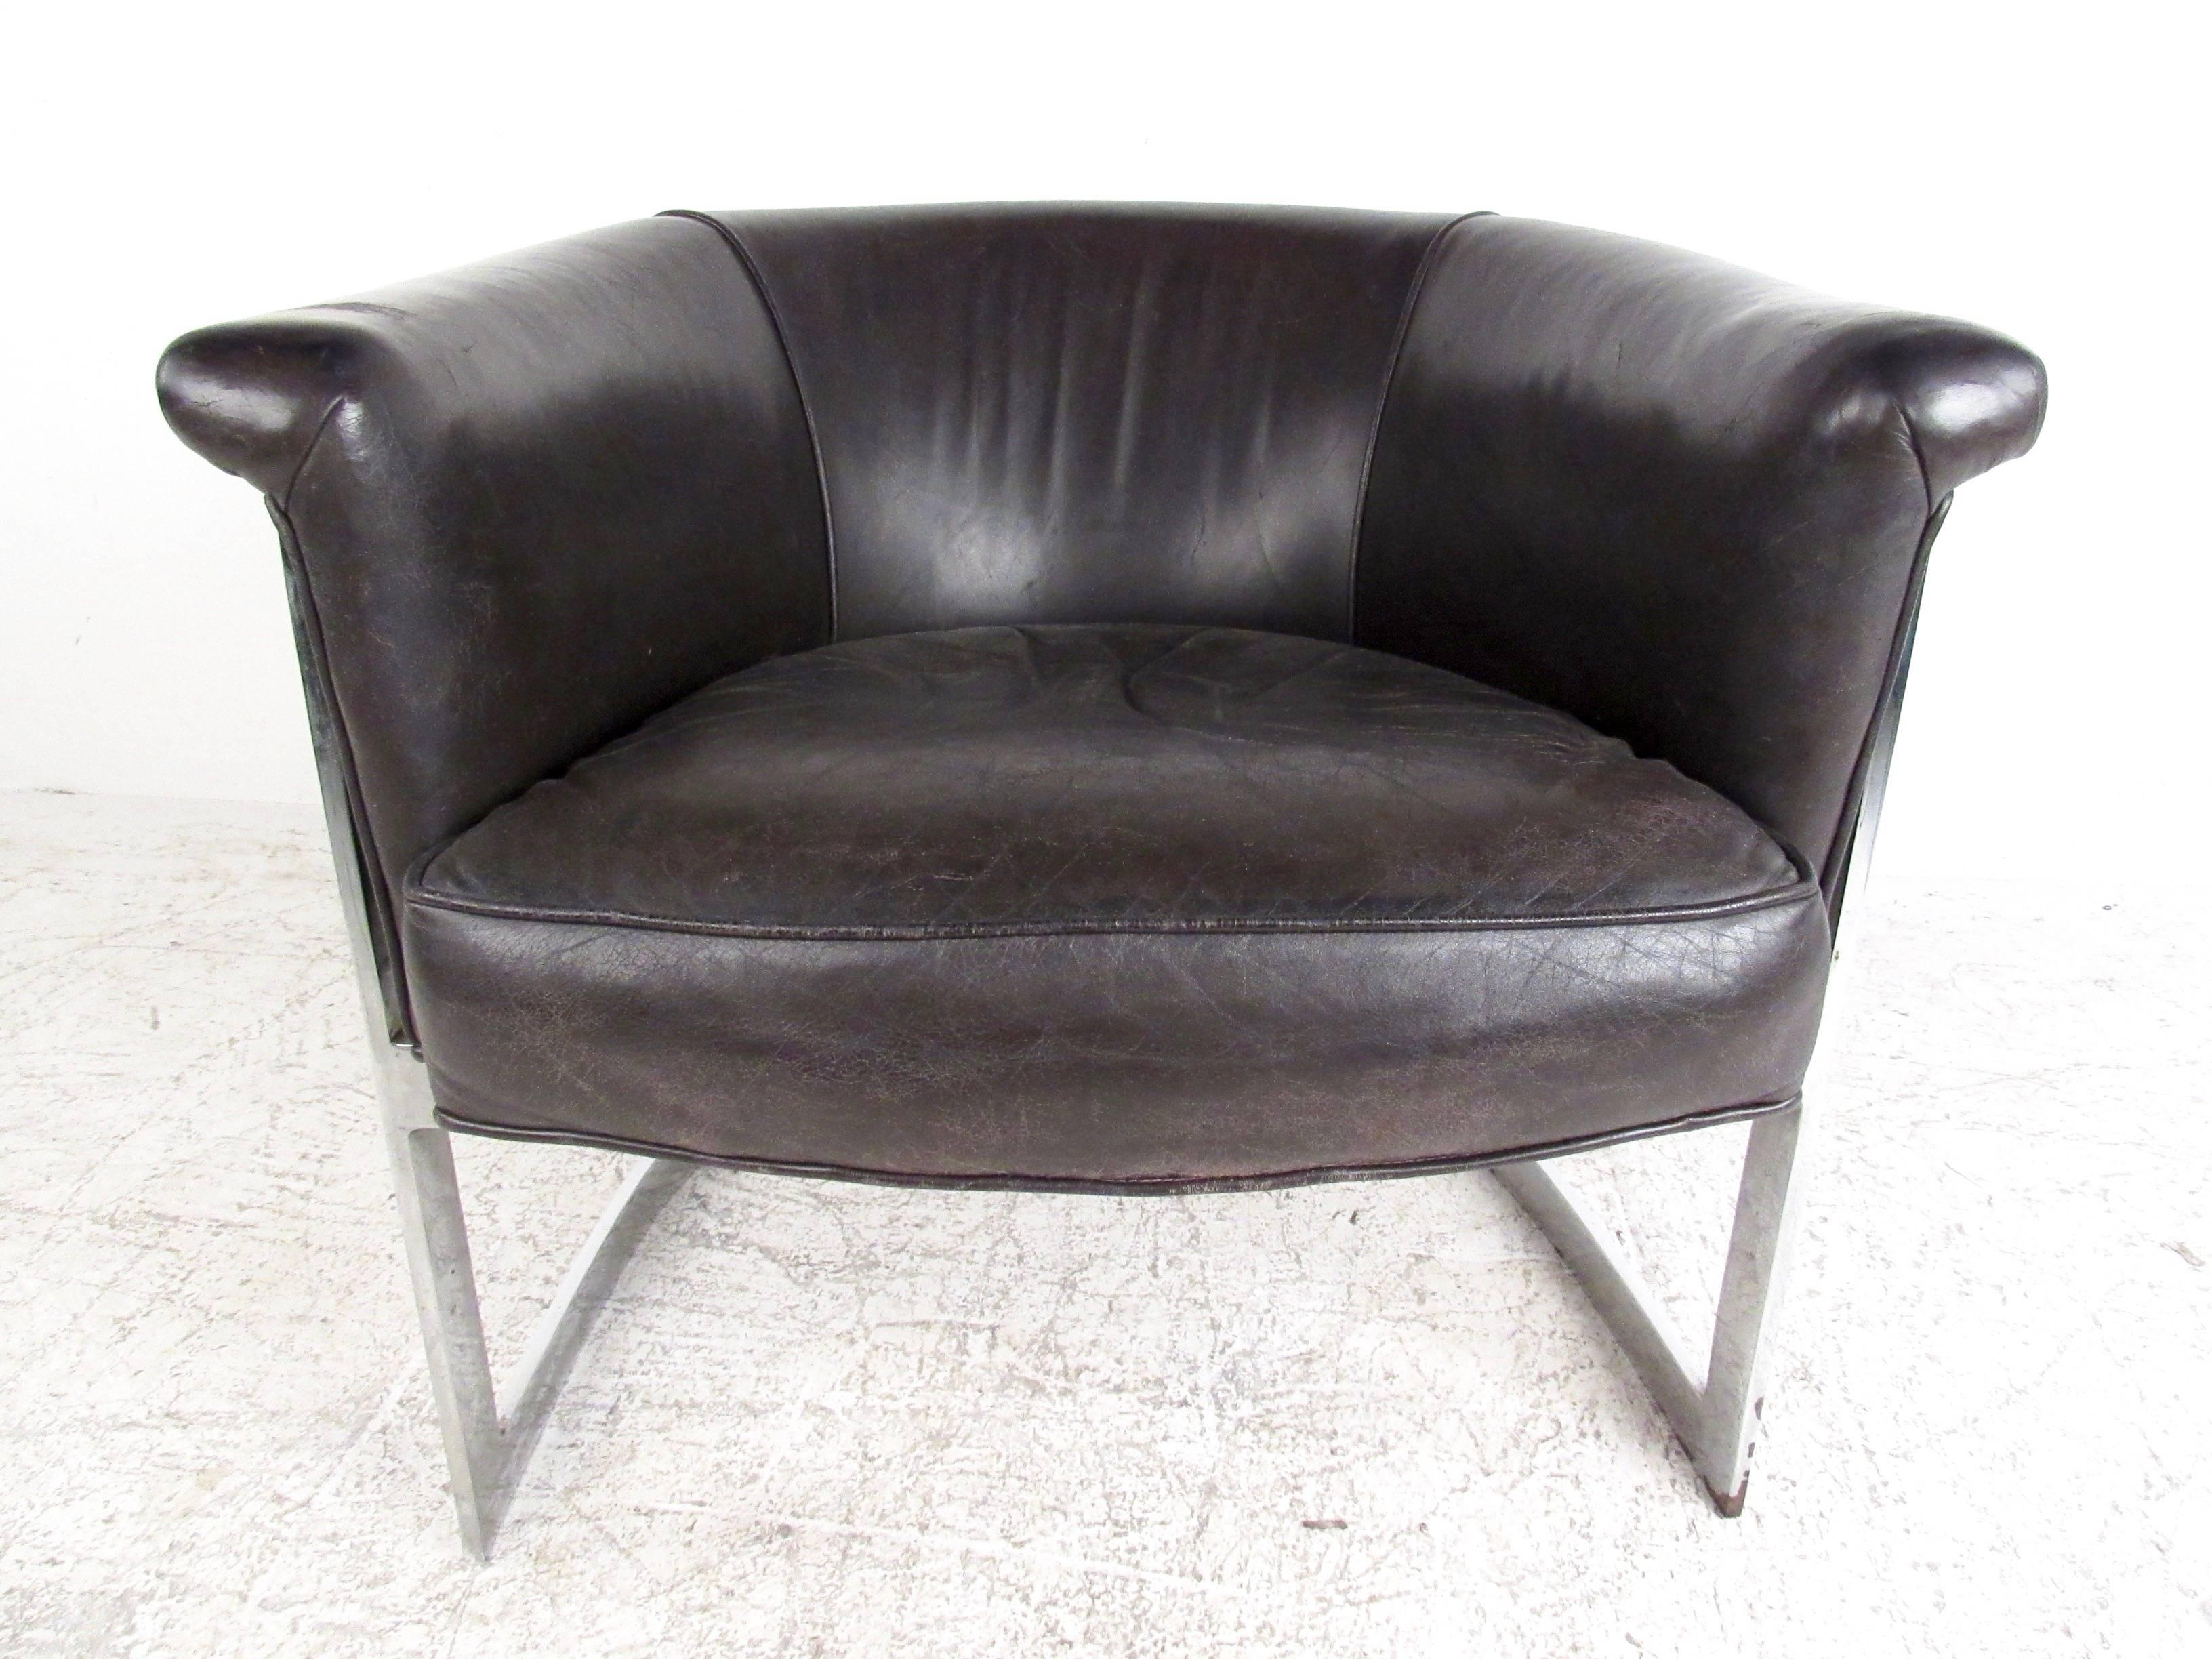 This unique barrel back chair features rich dark brown leather with a chrome finish cantilever base in the style of Milo Baughman. Comfortable and stylish Mid-Century seating for any interior, this unique rounded back club chair combines vintage